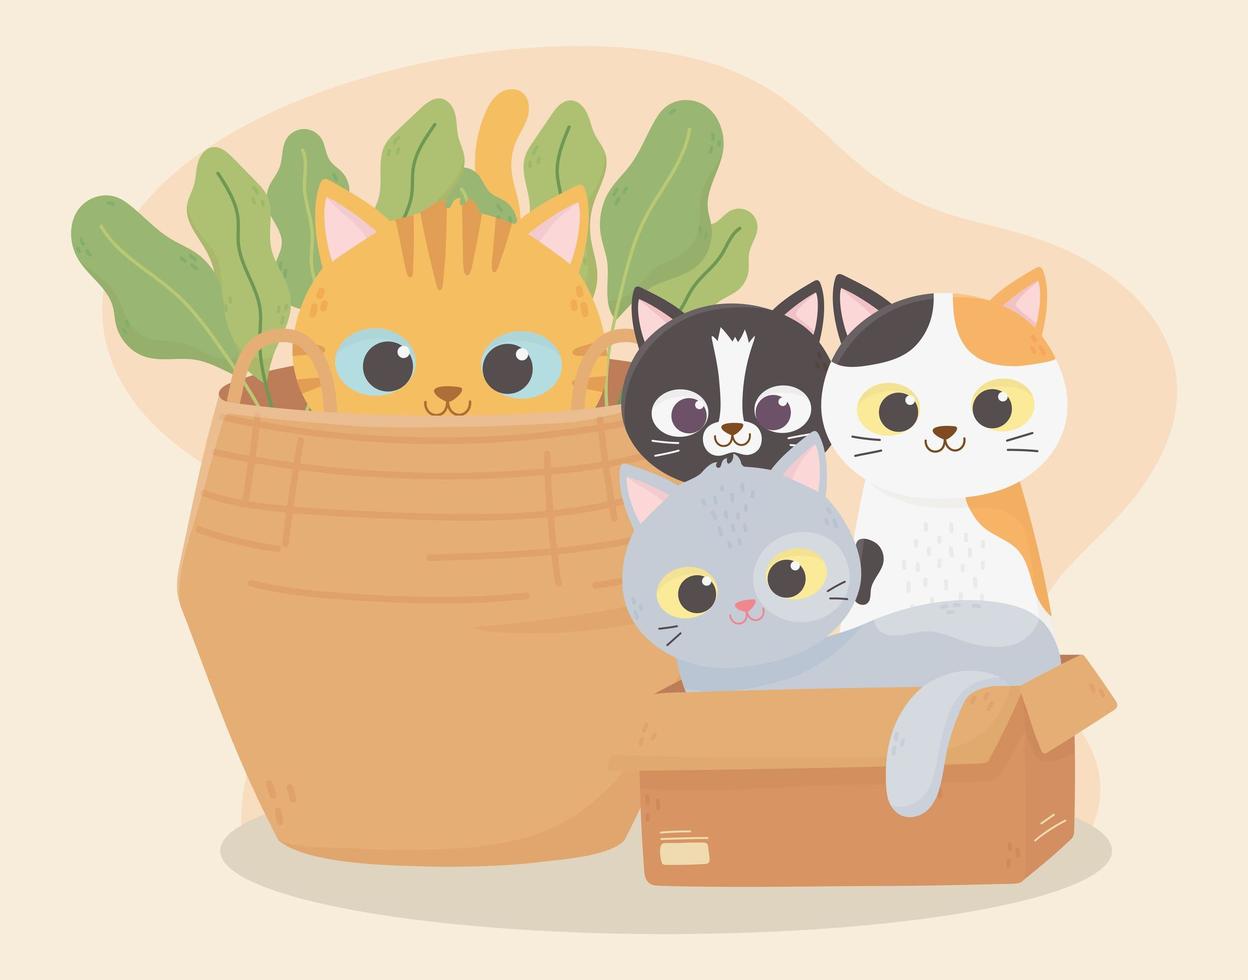 cats make me happy, cats in cardboard box and kitten in basket cartoon vector